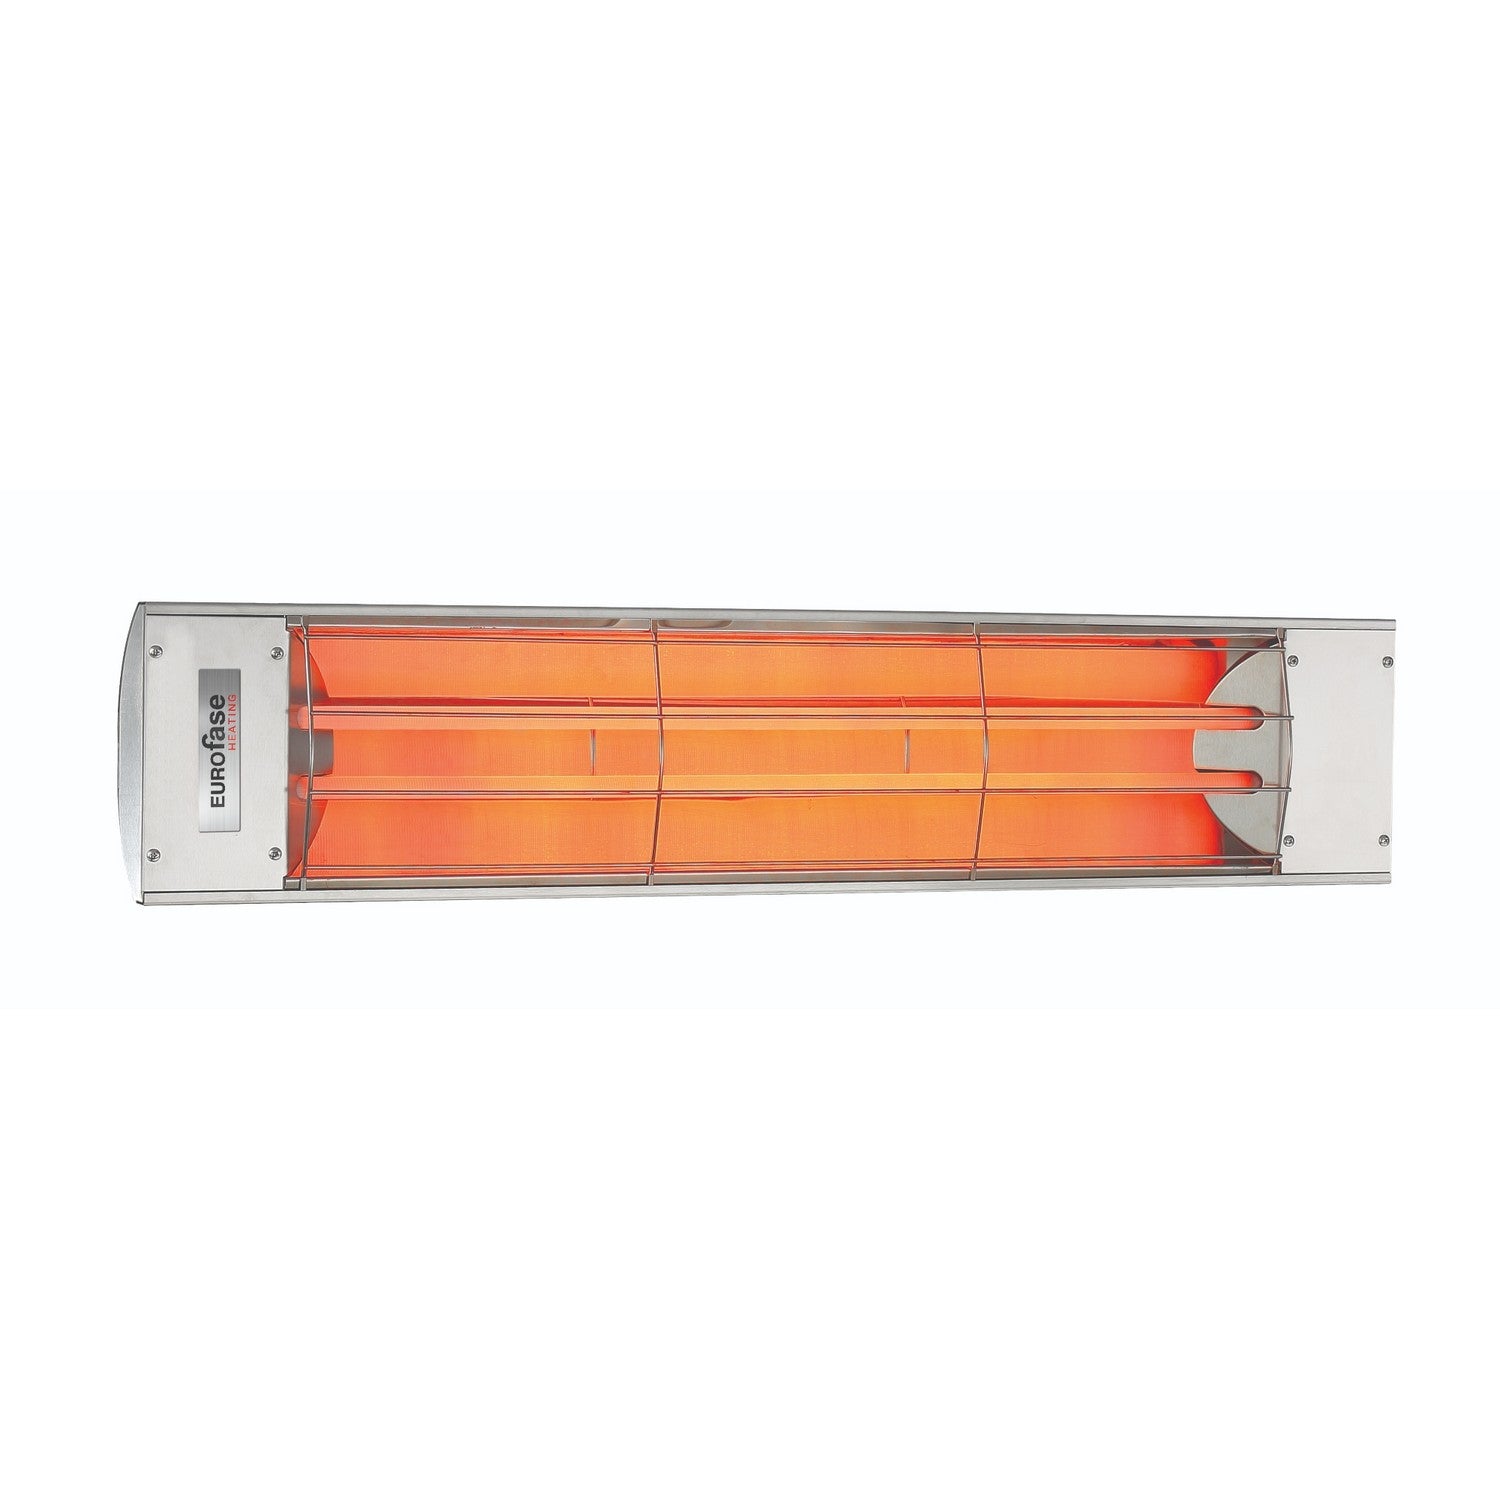 Eurofase - EF40208S - Electric Heater - Stainless Steel